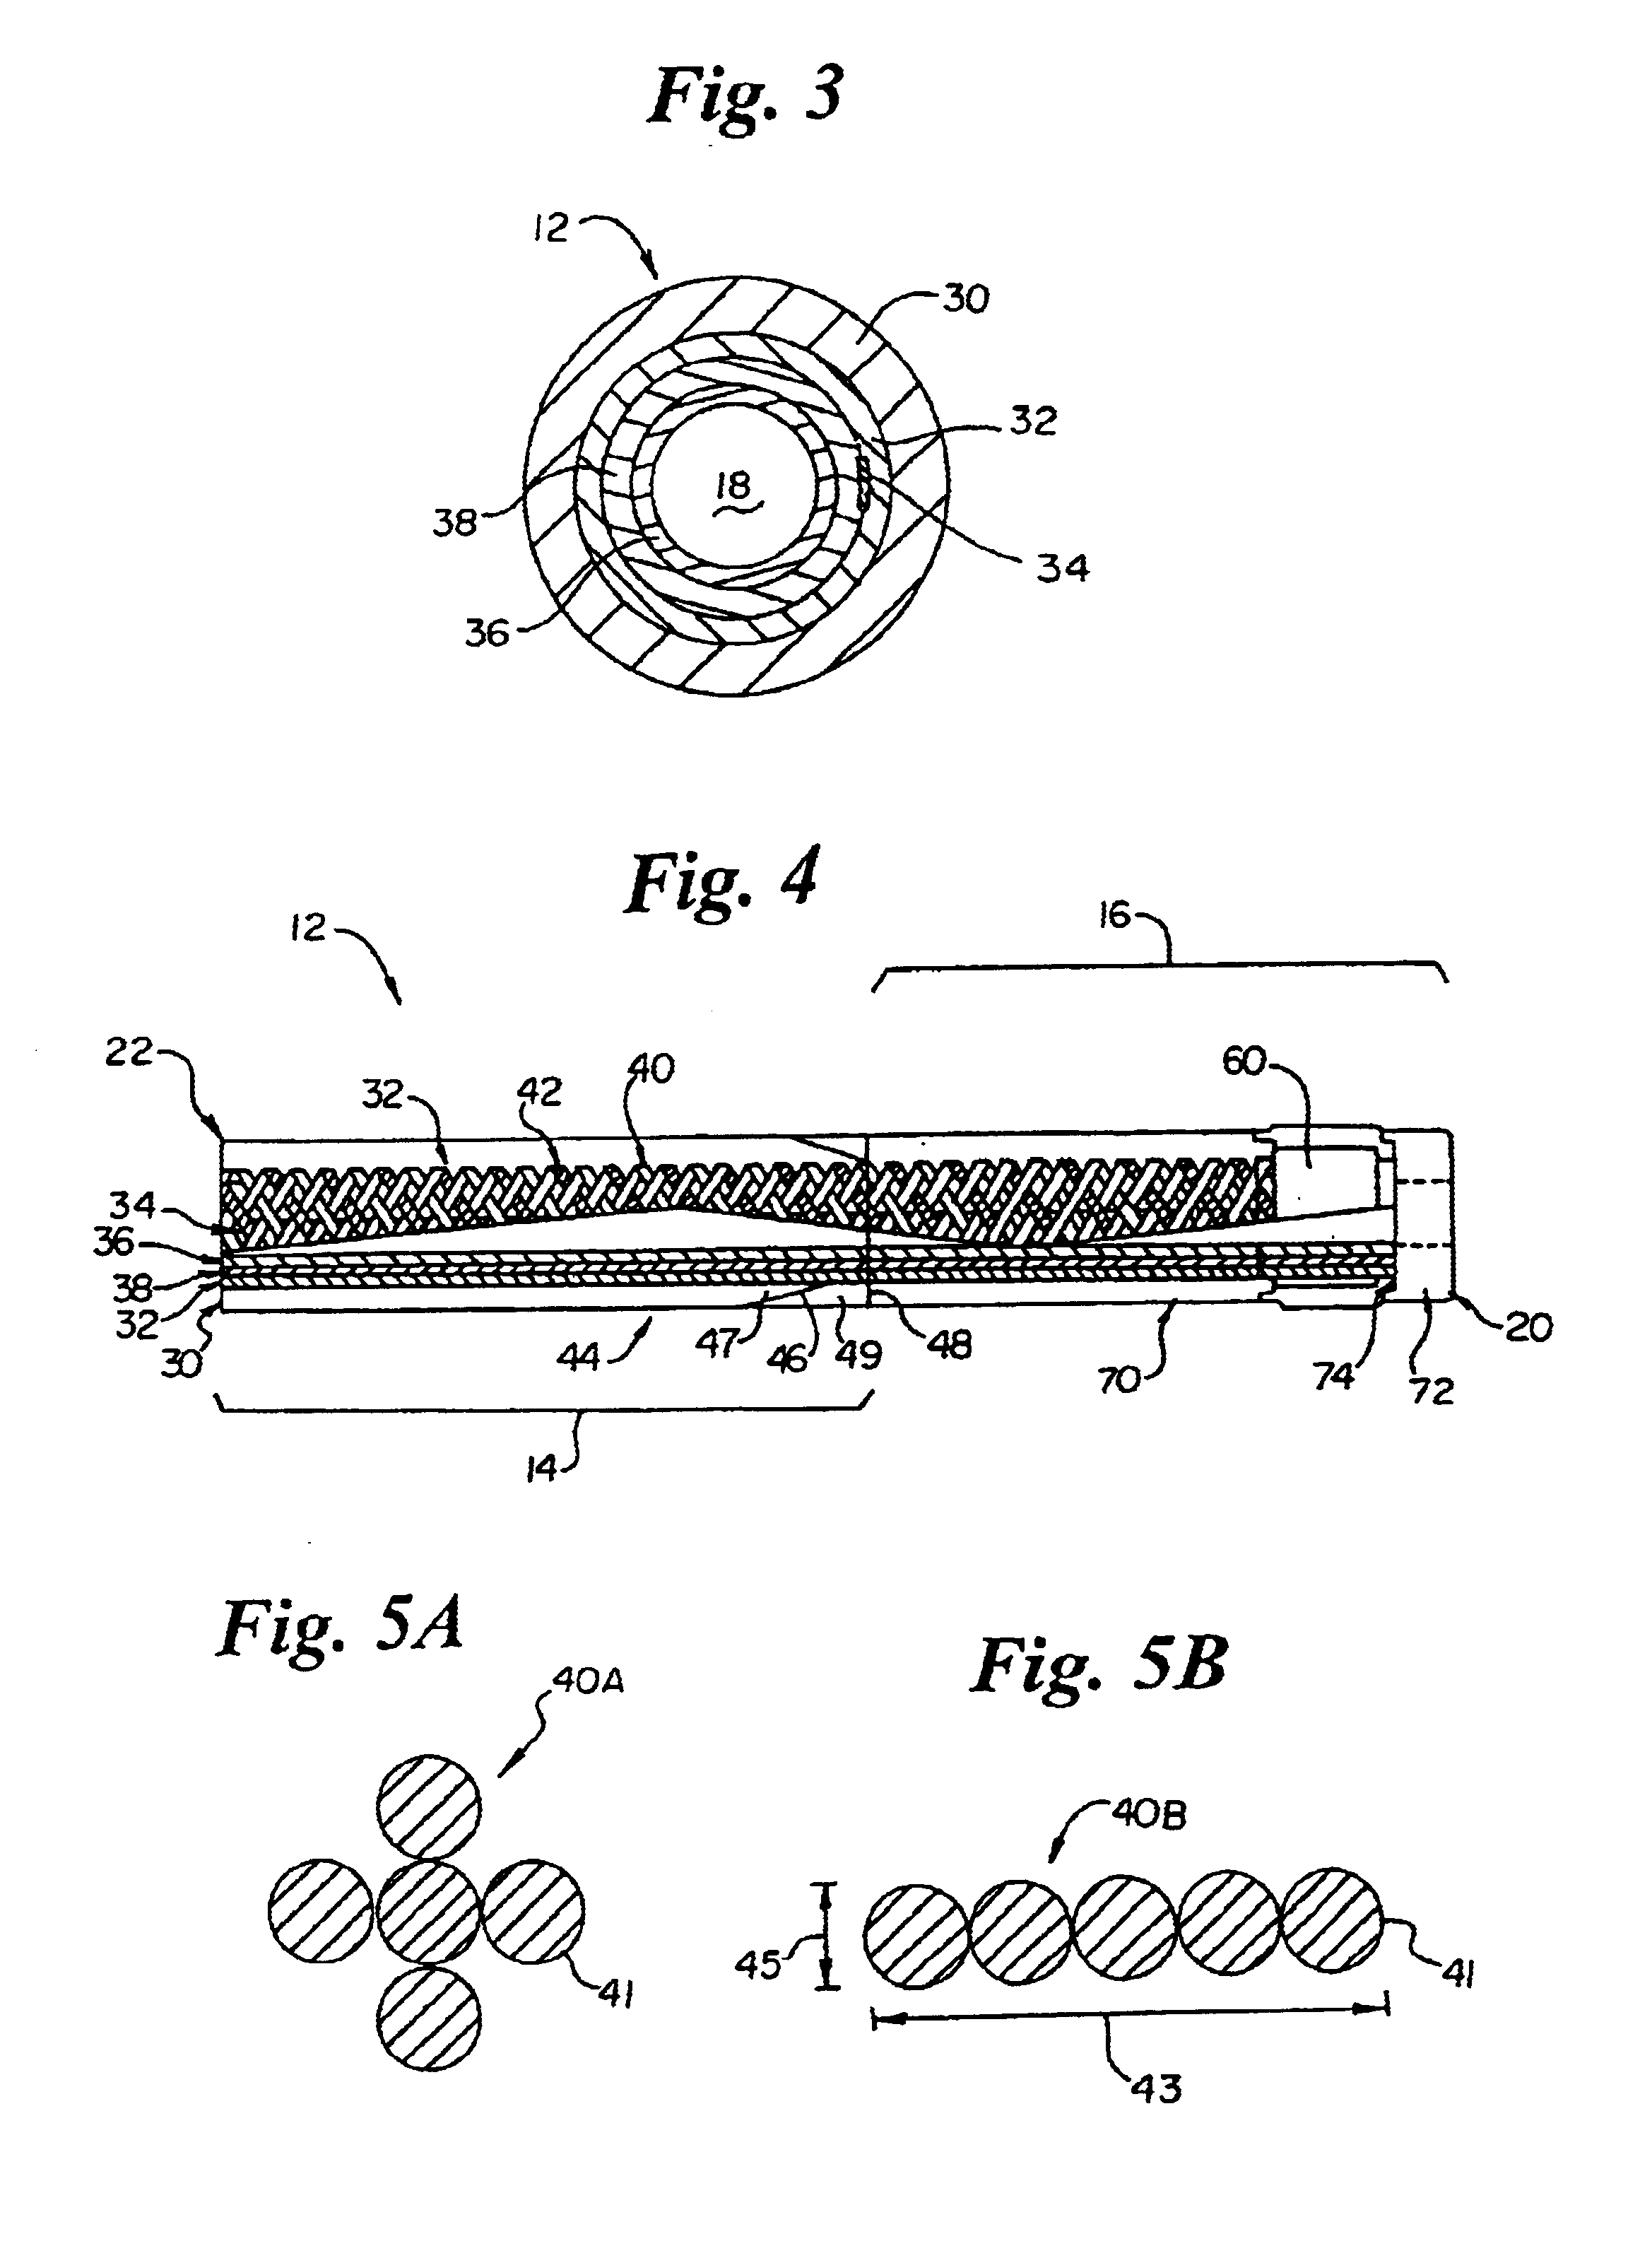 Intravascular catheter with composite reinforcement